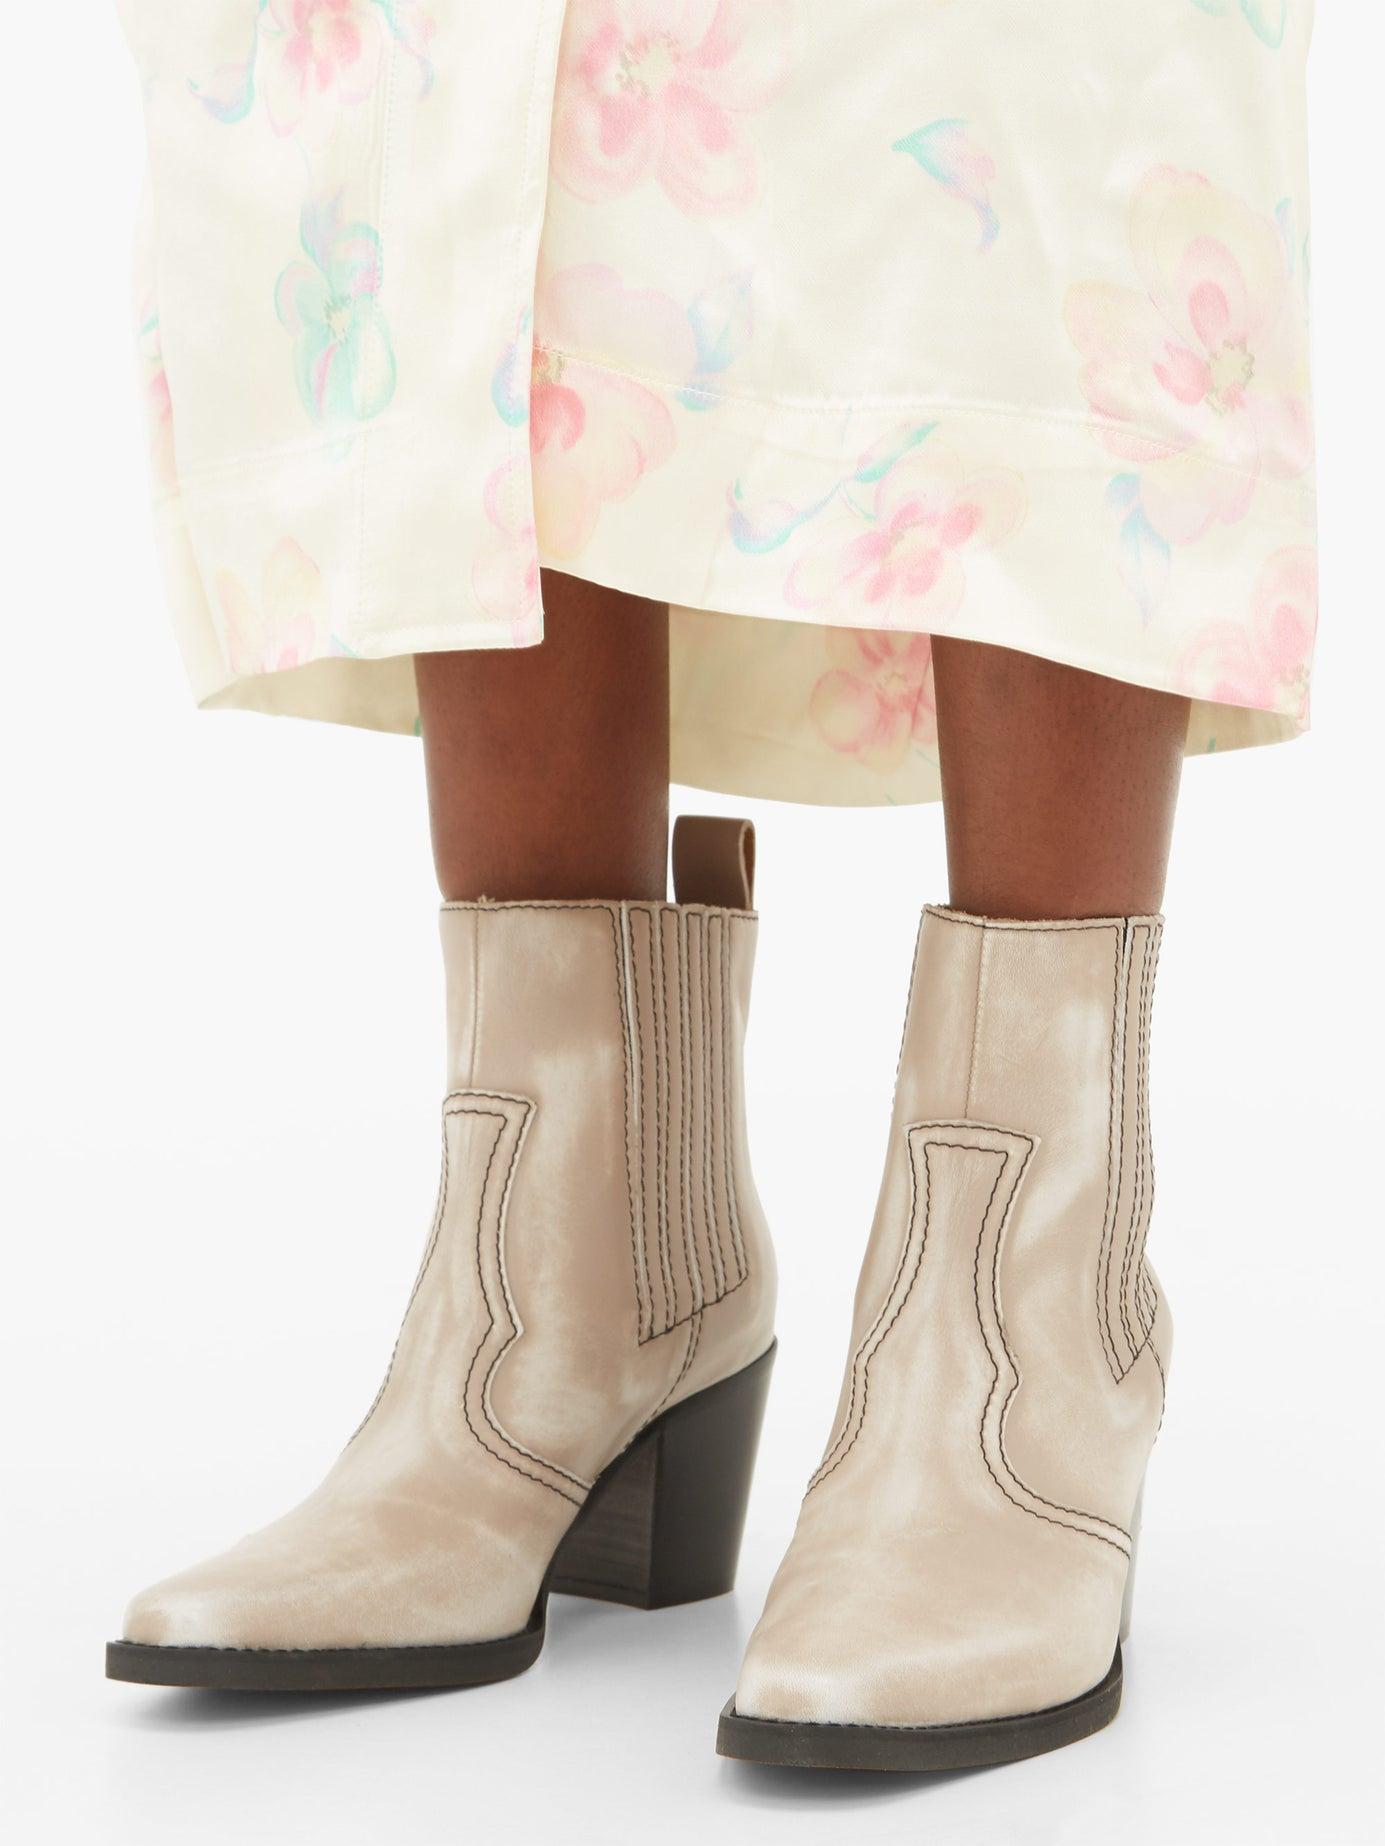 Ganni Callie Western Leather Ankle Boots in Cream (Natural) - Lyst